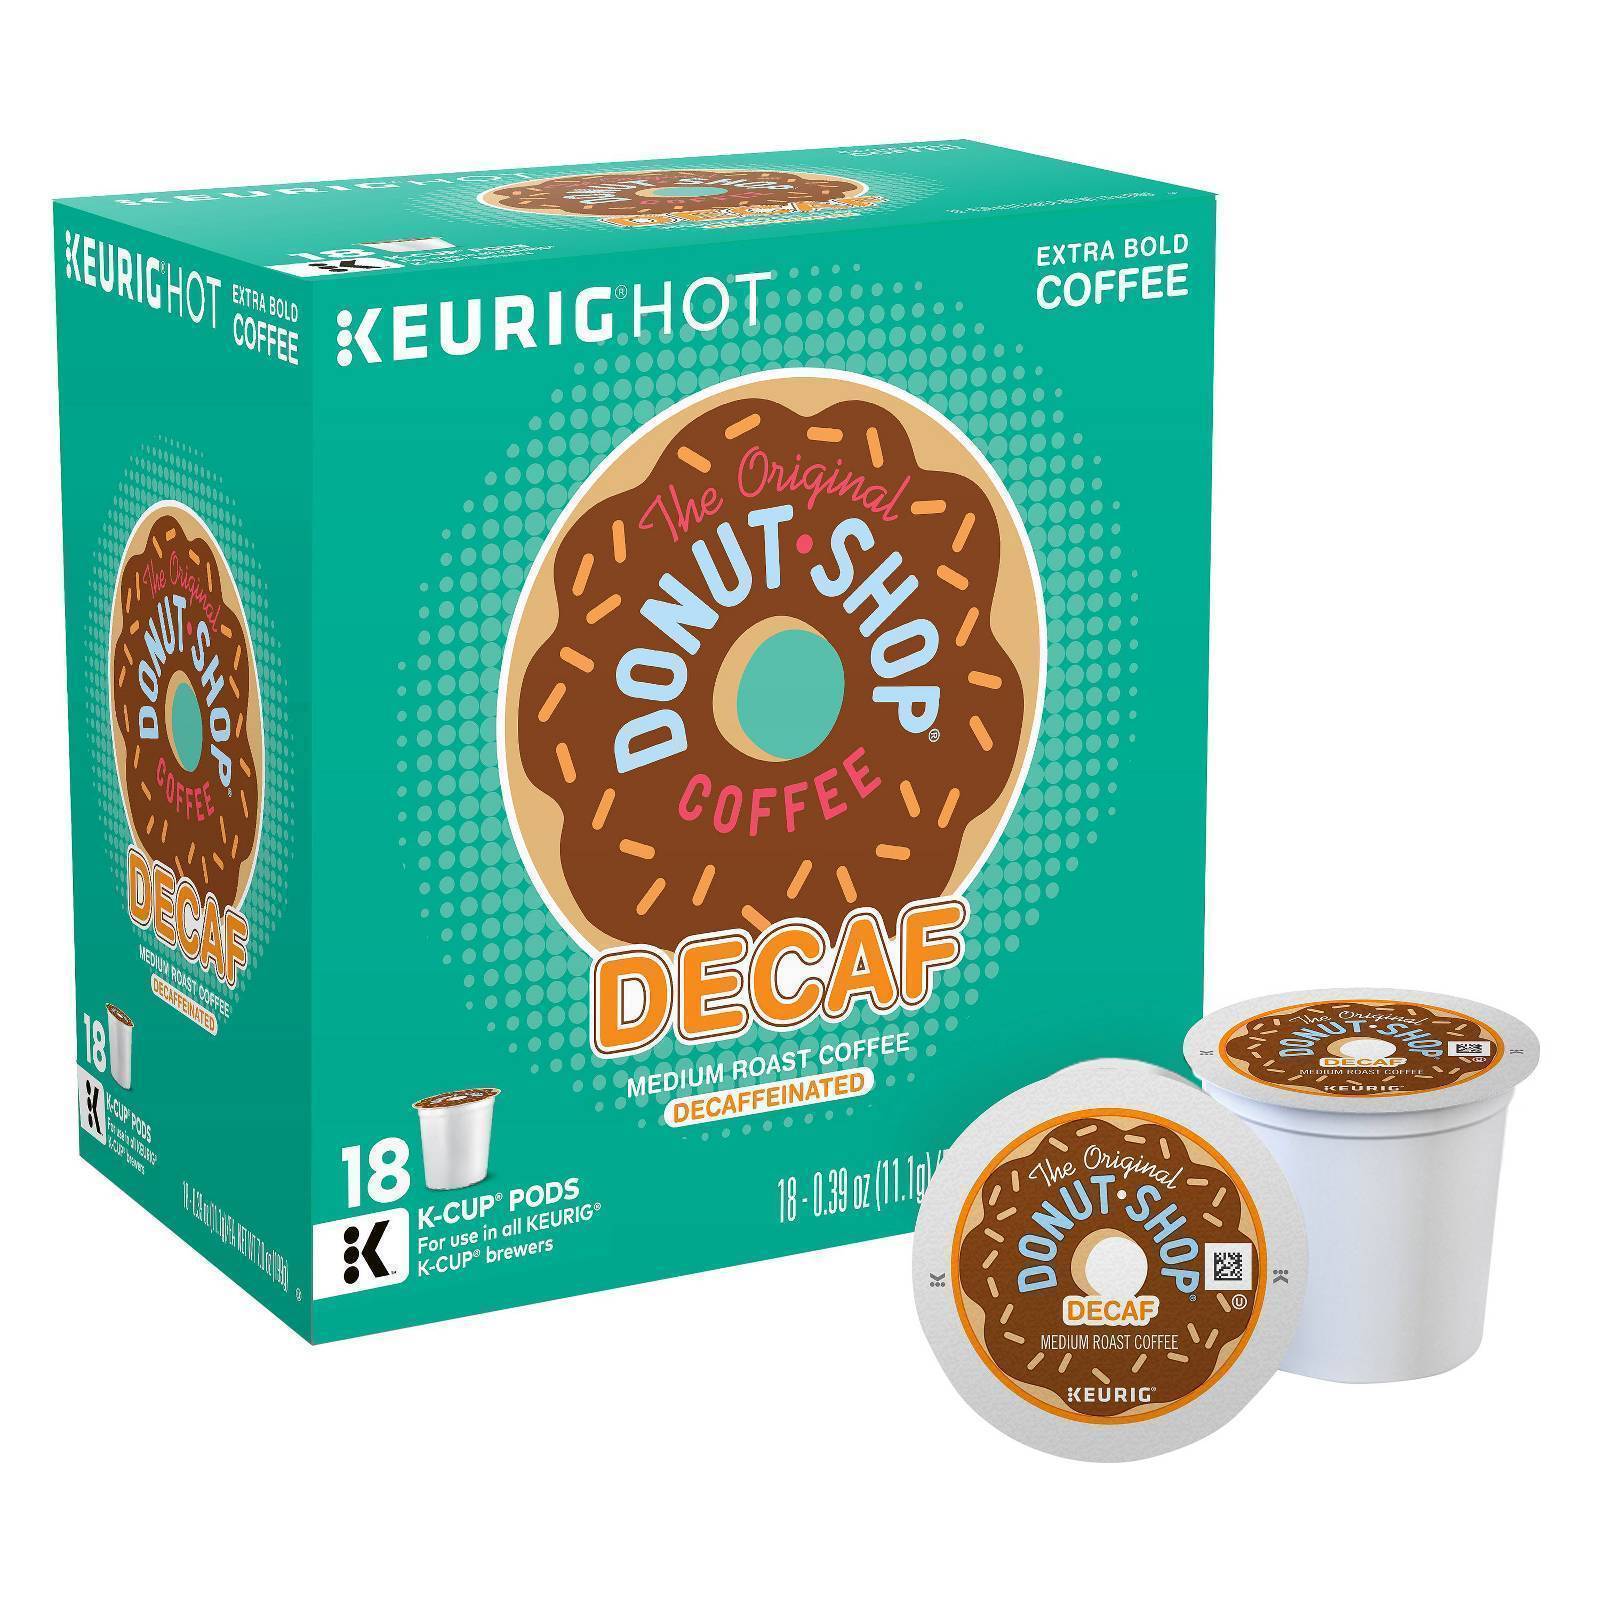 The Original Donut Shop DECAF Coffee 18 to 108 Keurig K cups Pick Any Quantity - $22.89 - $104.89